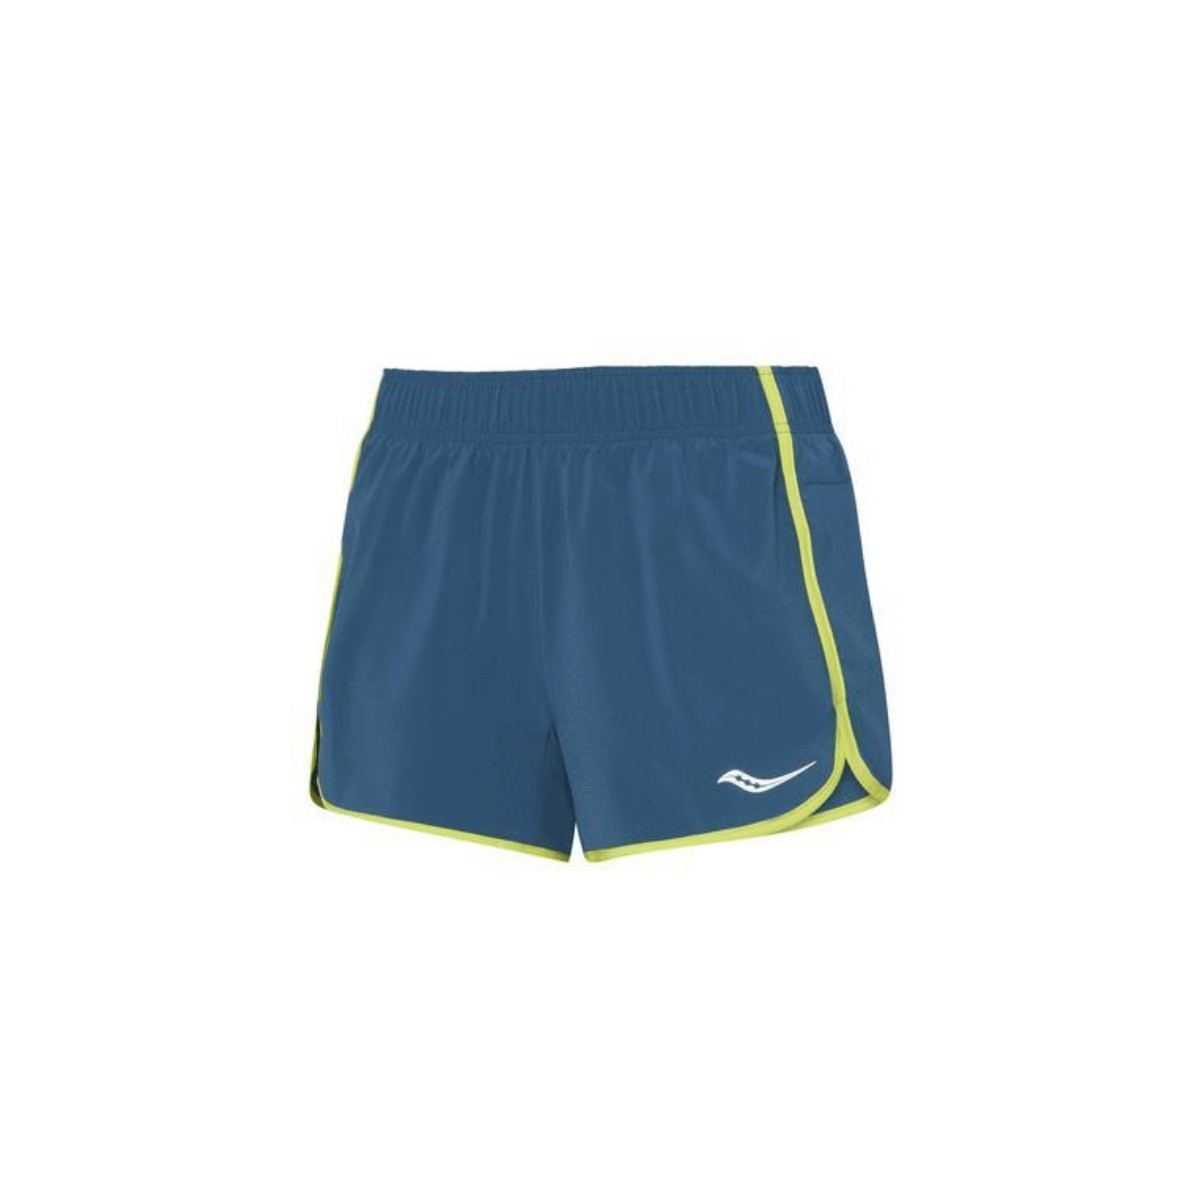 Saucony Outpace 3 Women´s Shorts Blue Green, Size XS